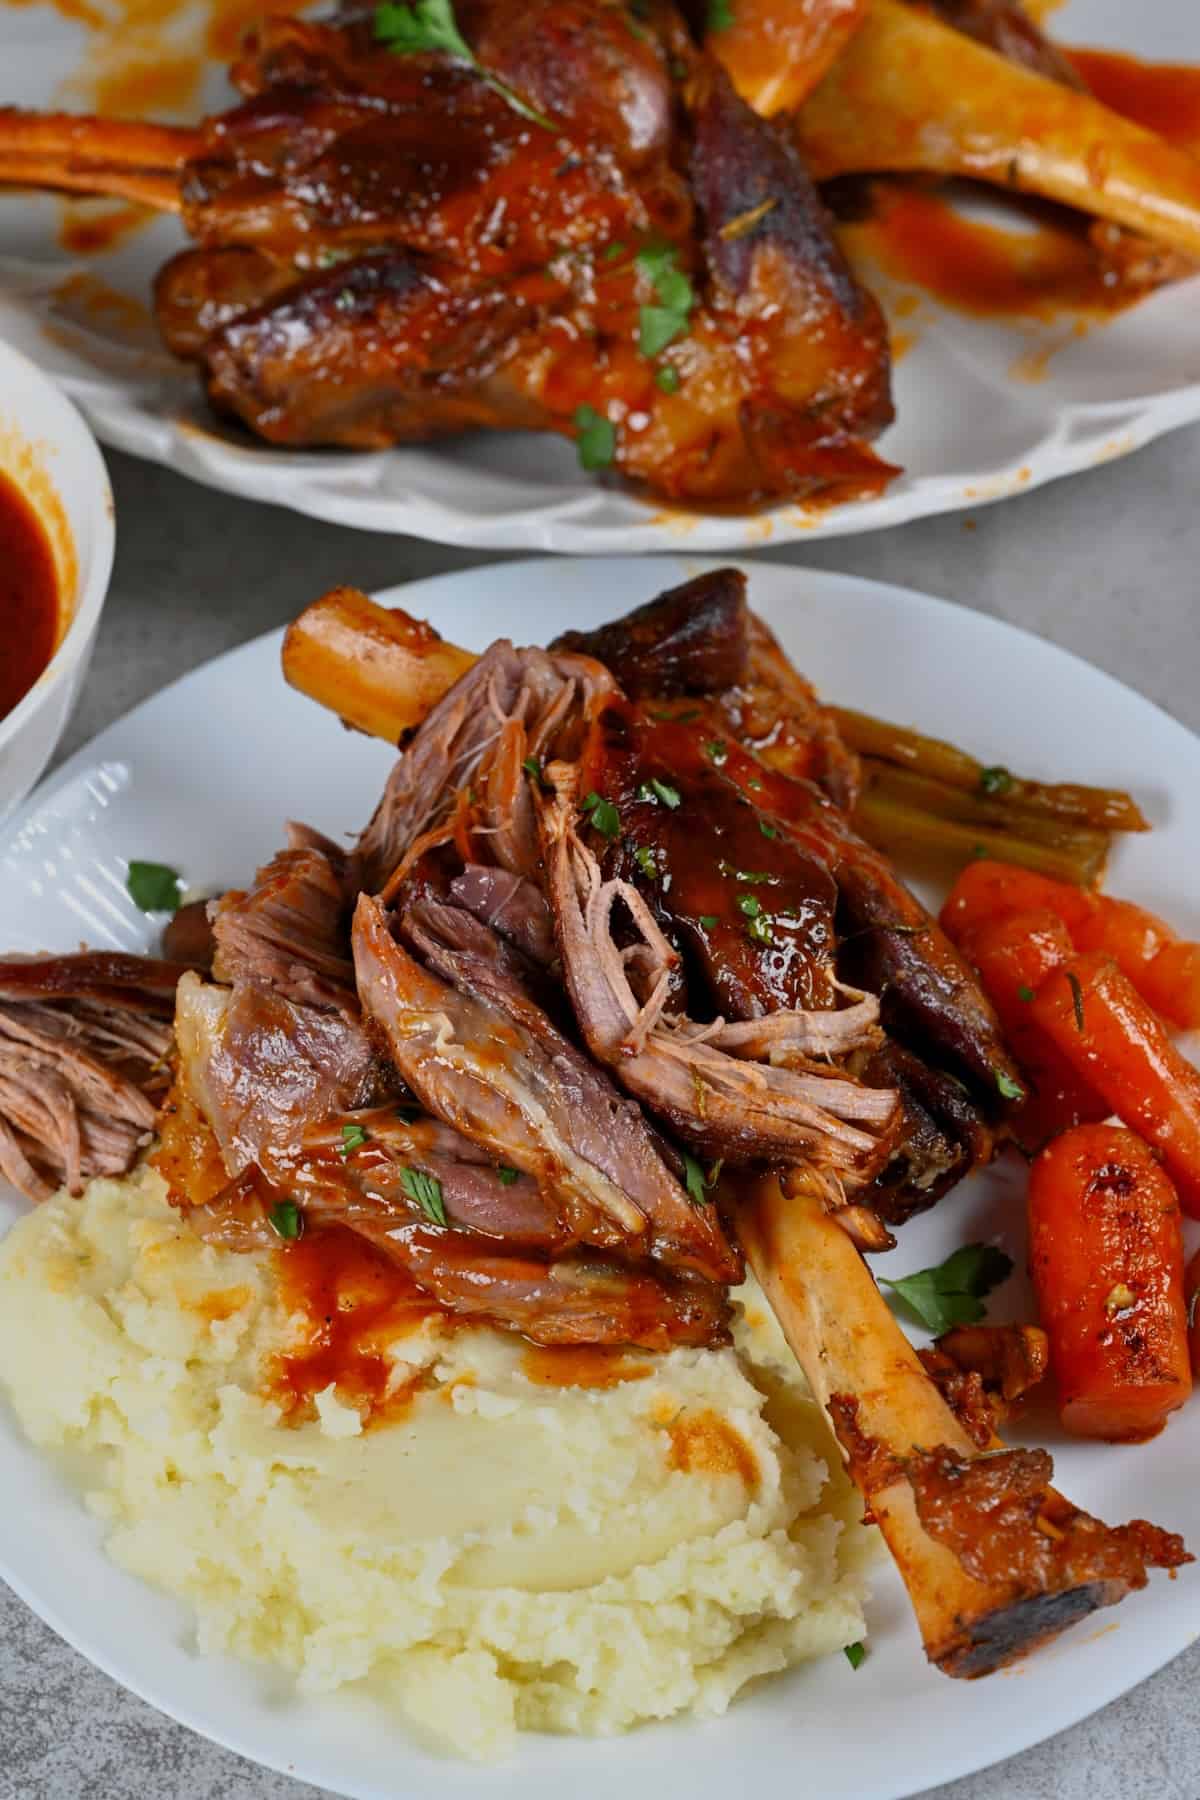 A serving of lamb shank with mashed potatoes